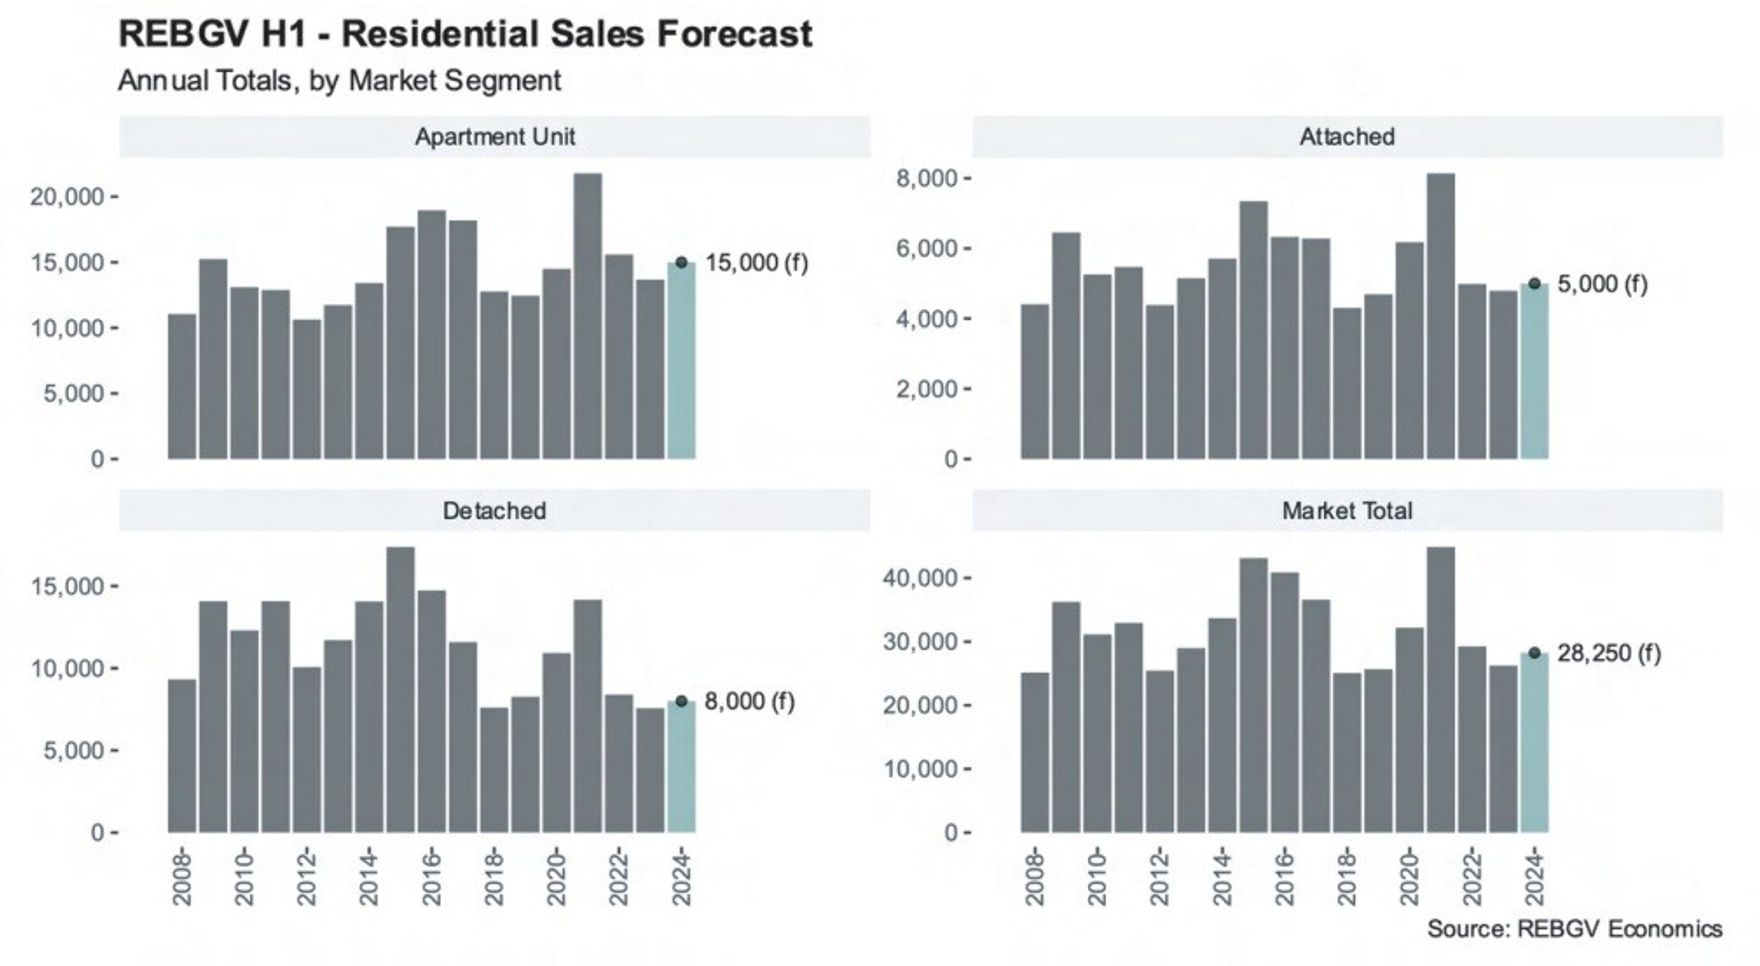 Residential sales forecast by property type.